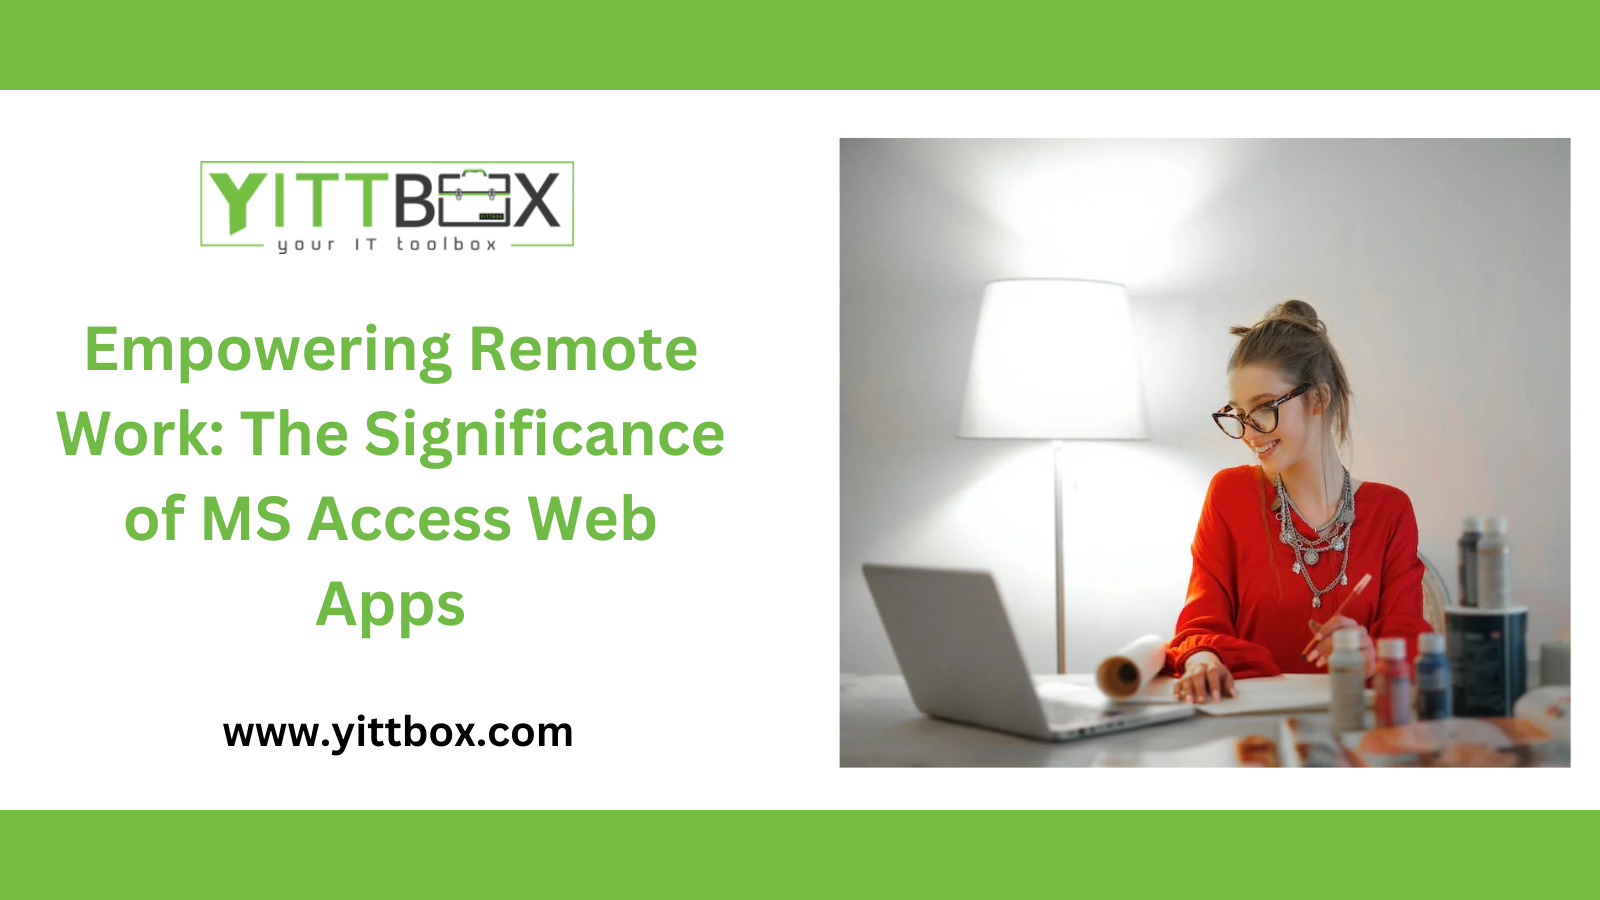 Empowering Remote Work: The Significance of MS Access Web Apps